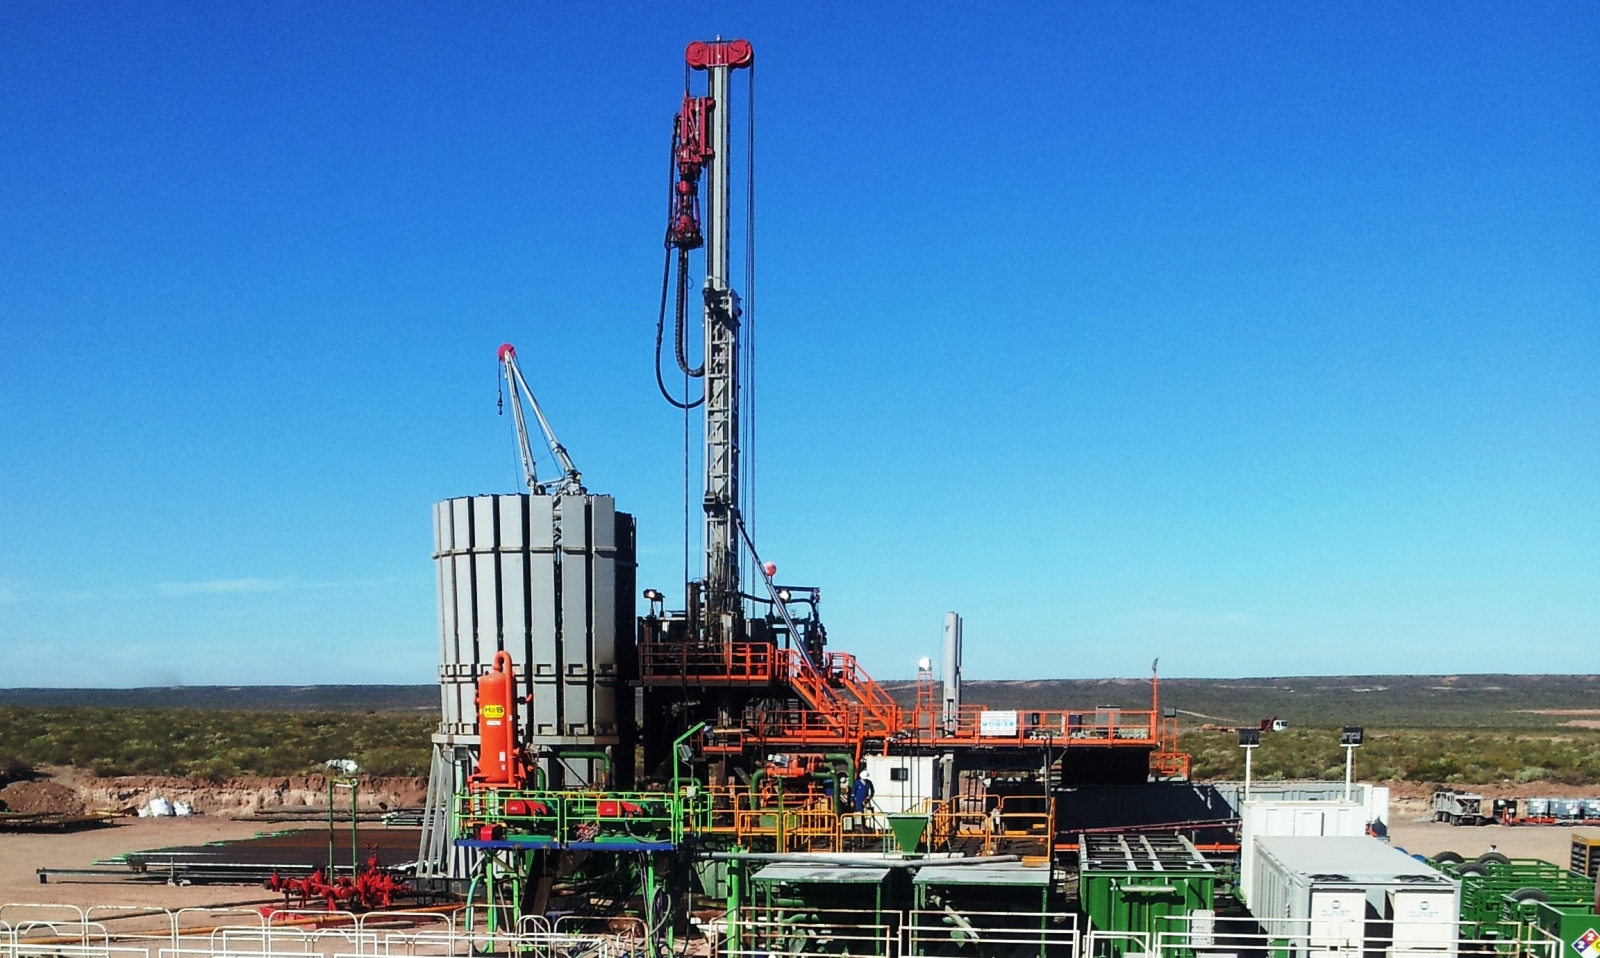 RECORD DEPTH OF 4,490 METERS IN ARGENTINA | News Trevi Group English site 1